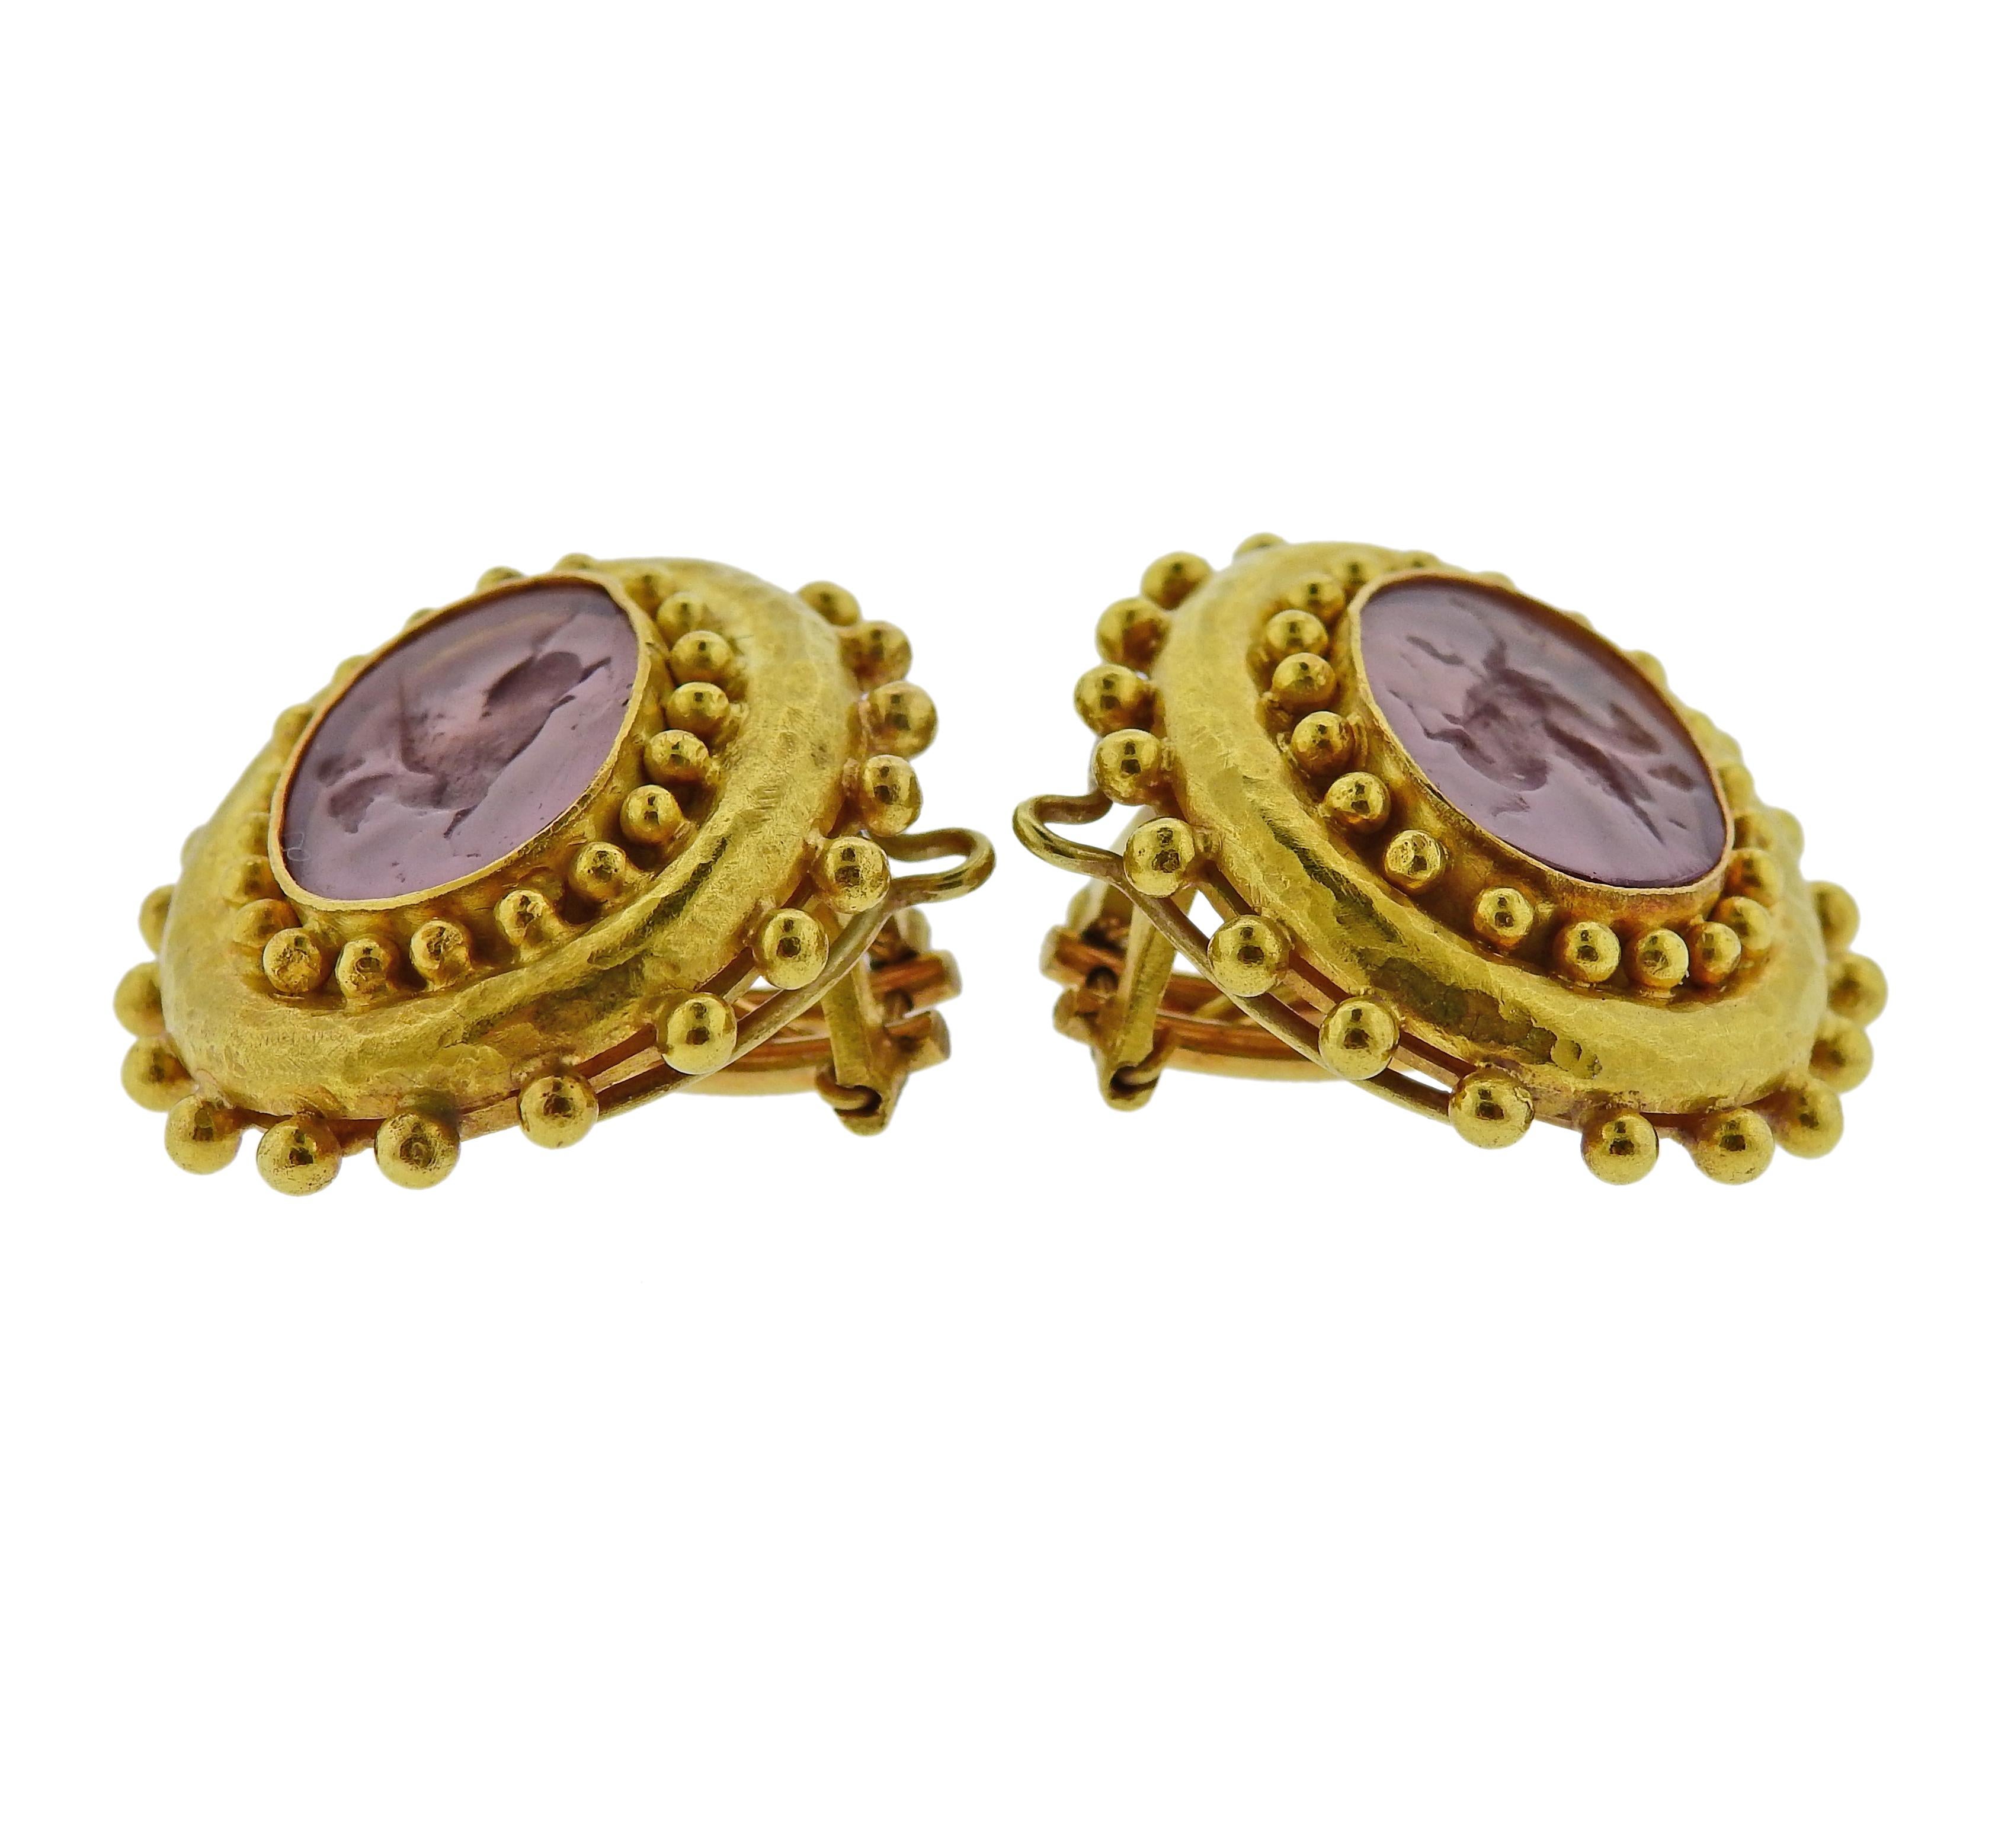 Pair of 18k yellow gold earrings by Elizabeth Locke, set with pink Venetian glass intaglio, backed with mother of pearl.  Earrings measure 25mm x 29mm, with collapsible posts. Weight is 24.3 grams. Marked: Locke E mark, 18k.